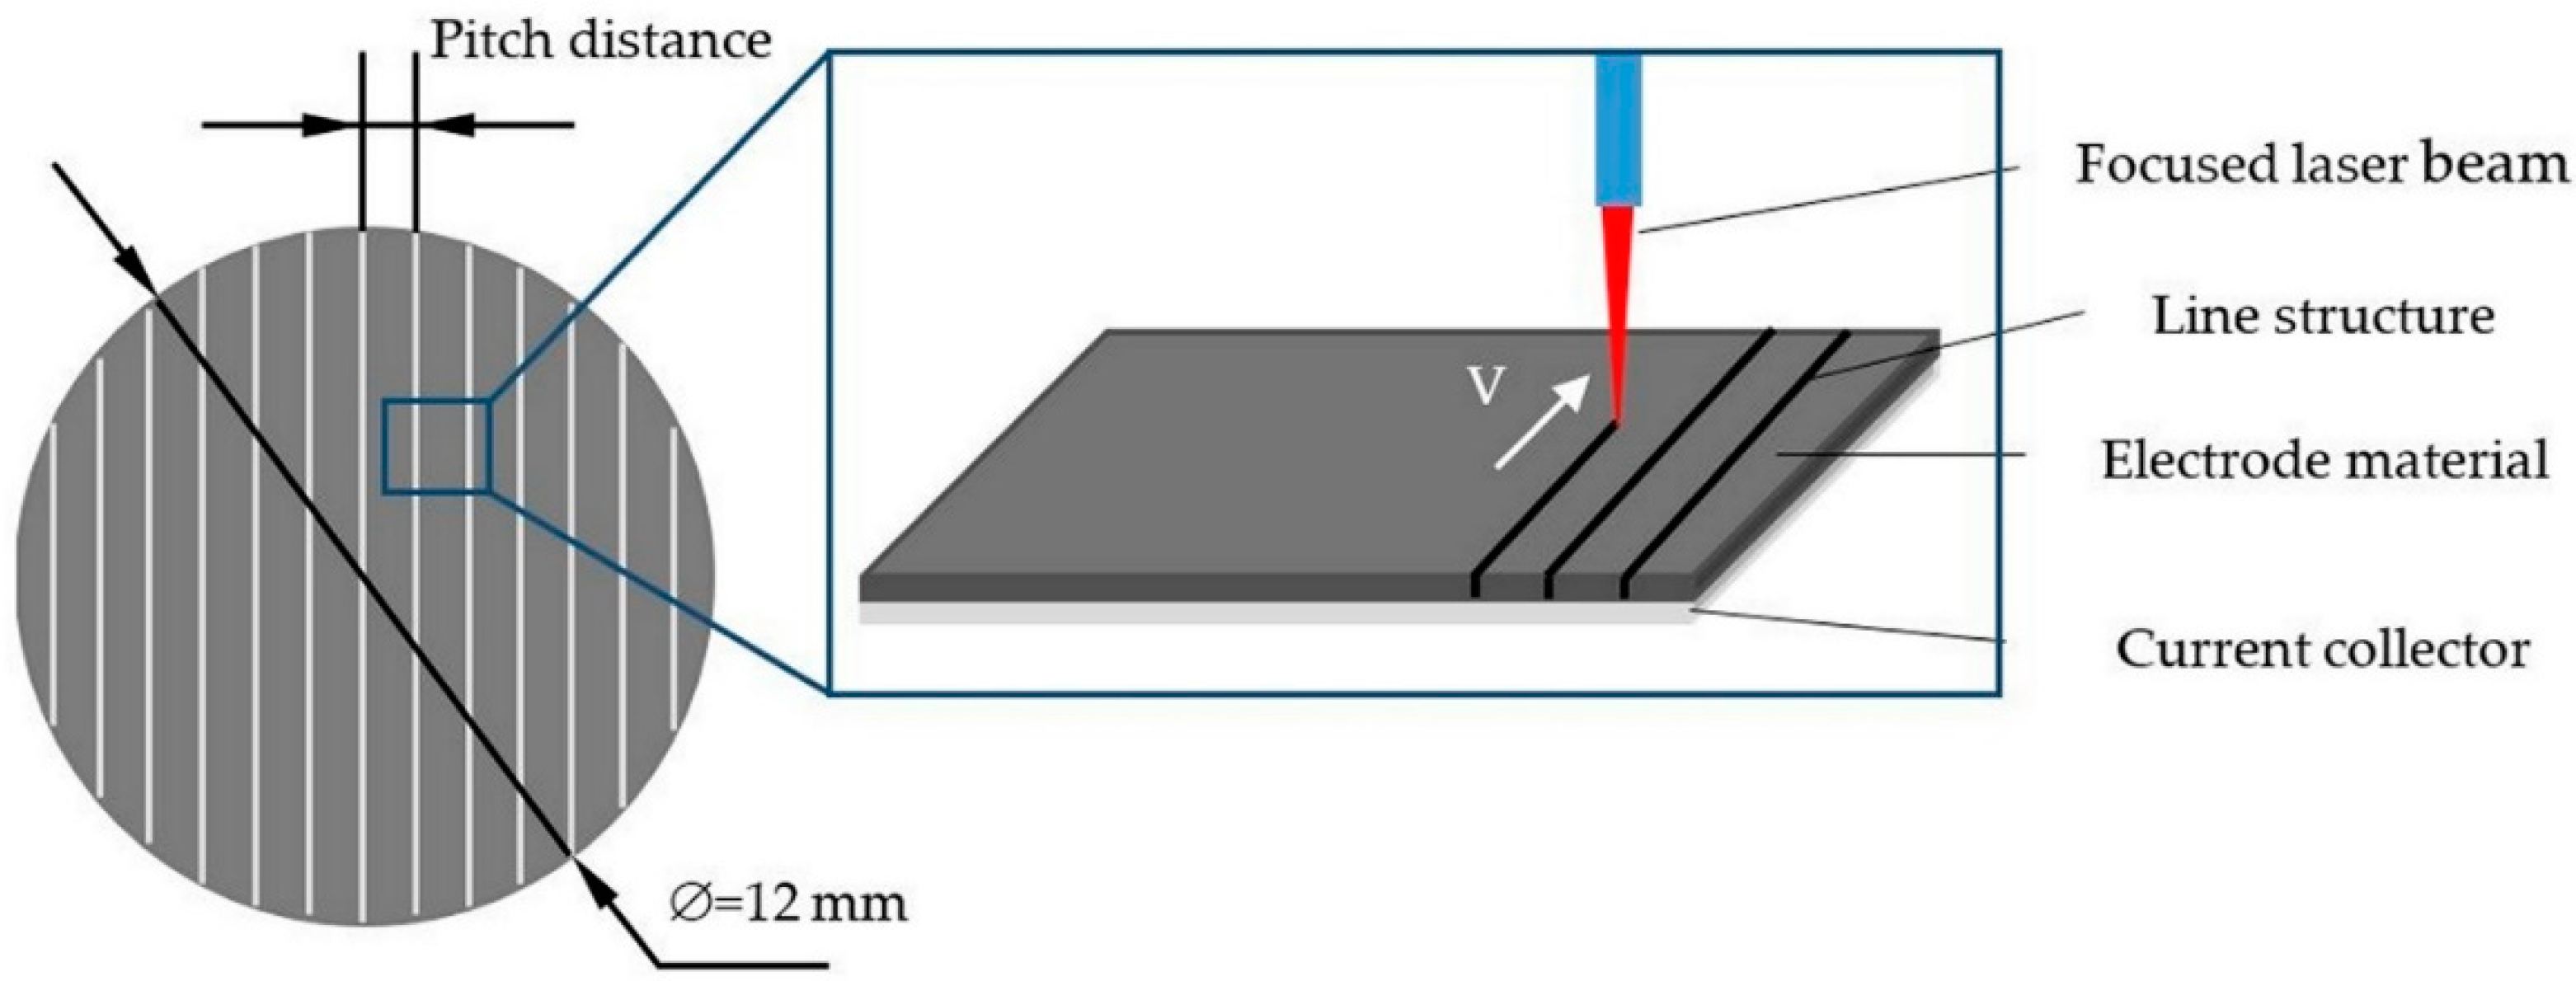 Applied Sciences | Free Full-Text | The Ultrafast Laser Ablation of  Li(Ni0.6Mn0.2Co0.2)O2 Electrodes with High Mass Loading